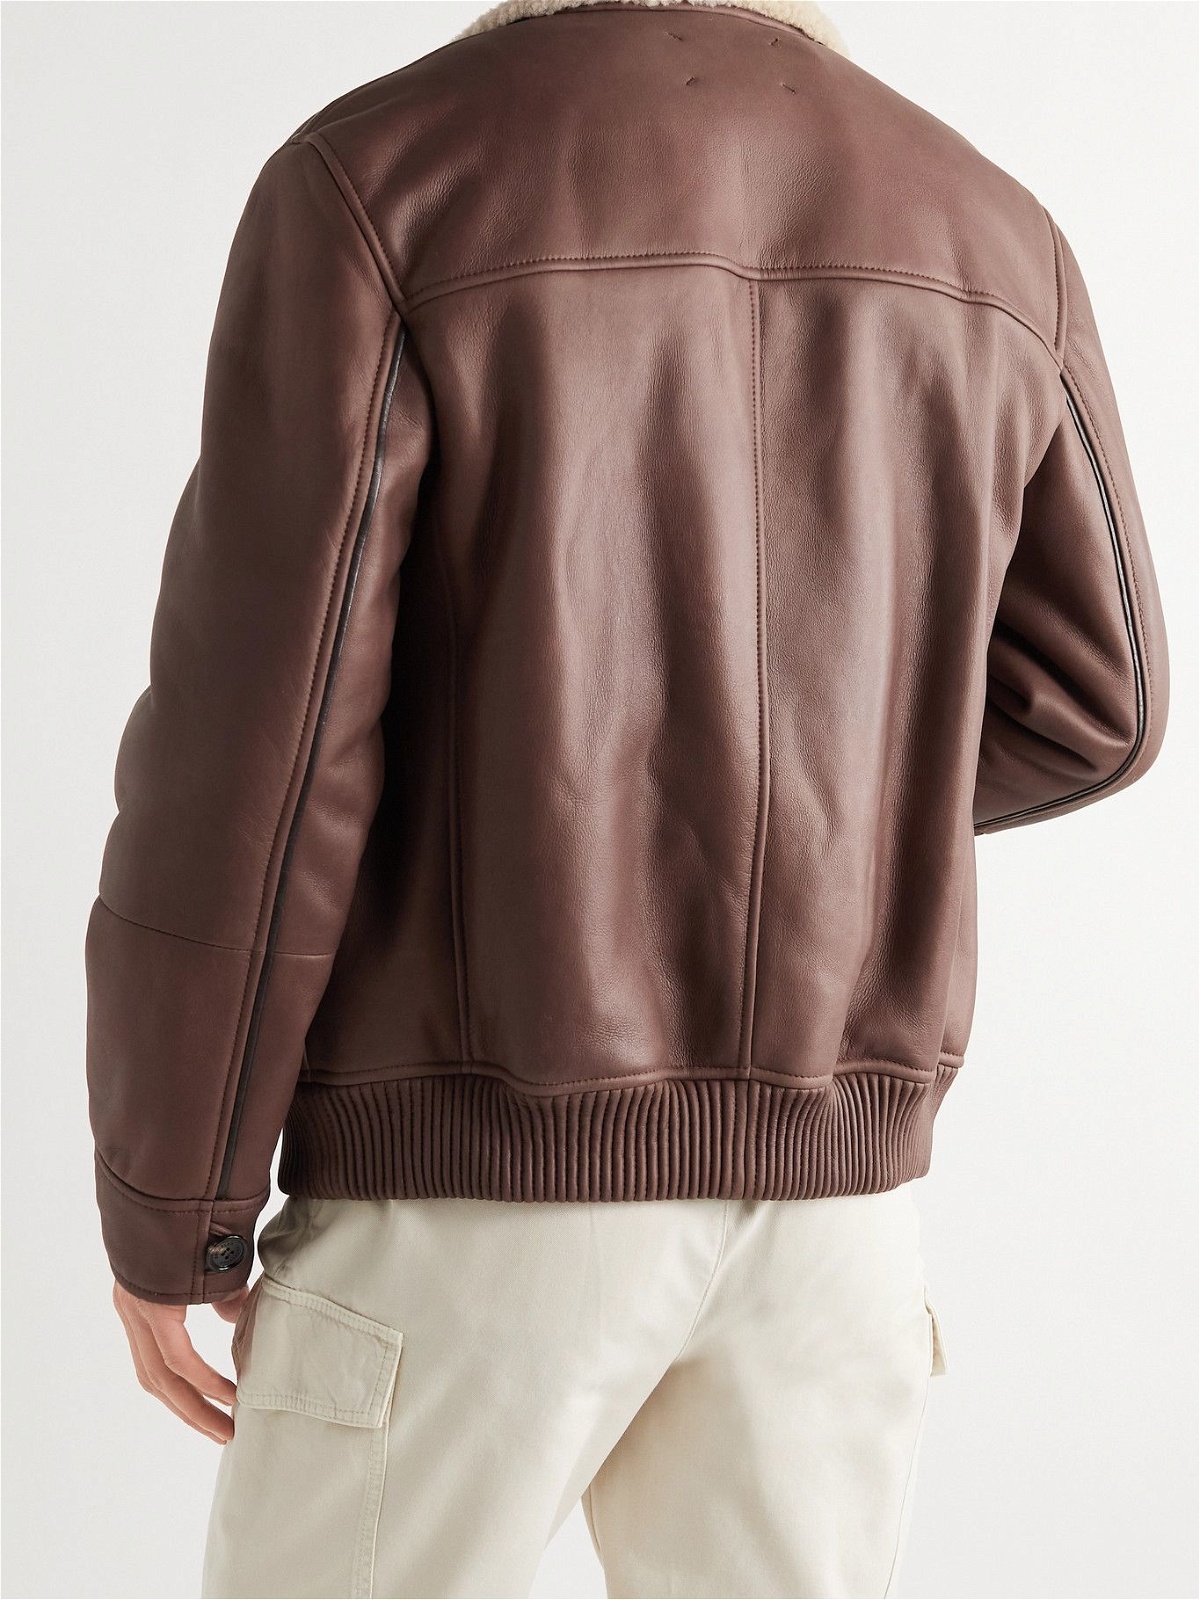 BRUNELLO CUCINELLI - Shearling-Lined Leather Jacket - Brown Brunello ...